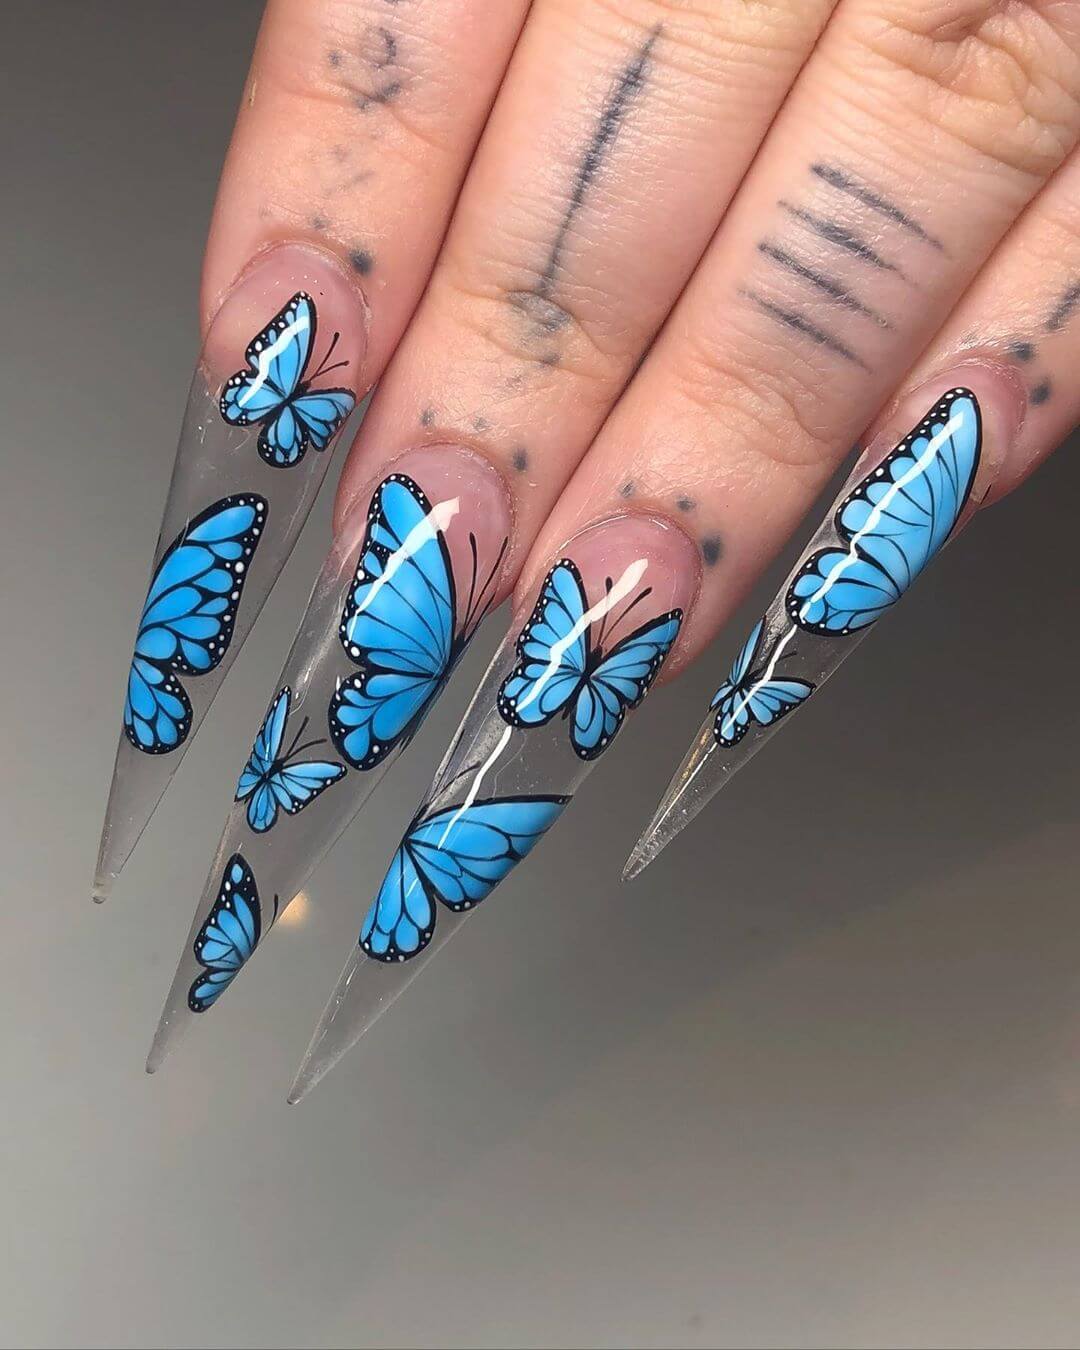 Butterfly Nail Art Making The Best Use Of Long Nails